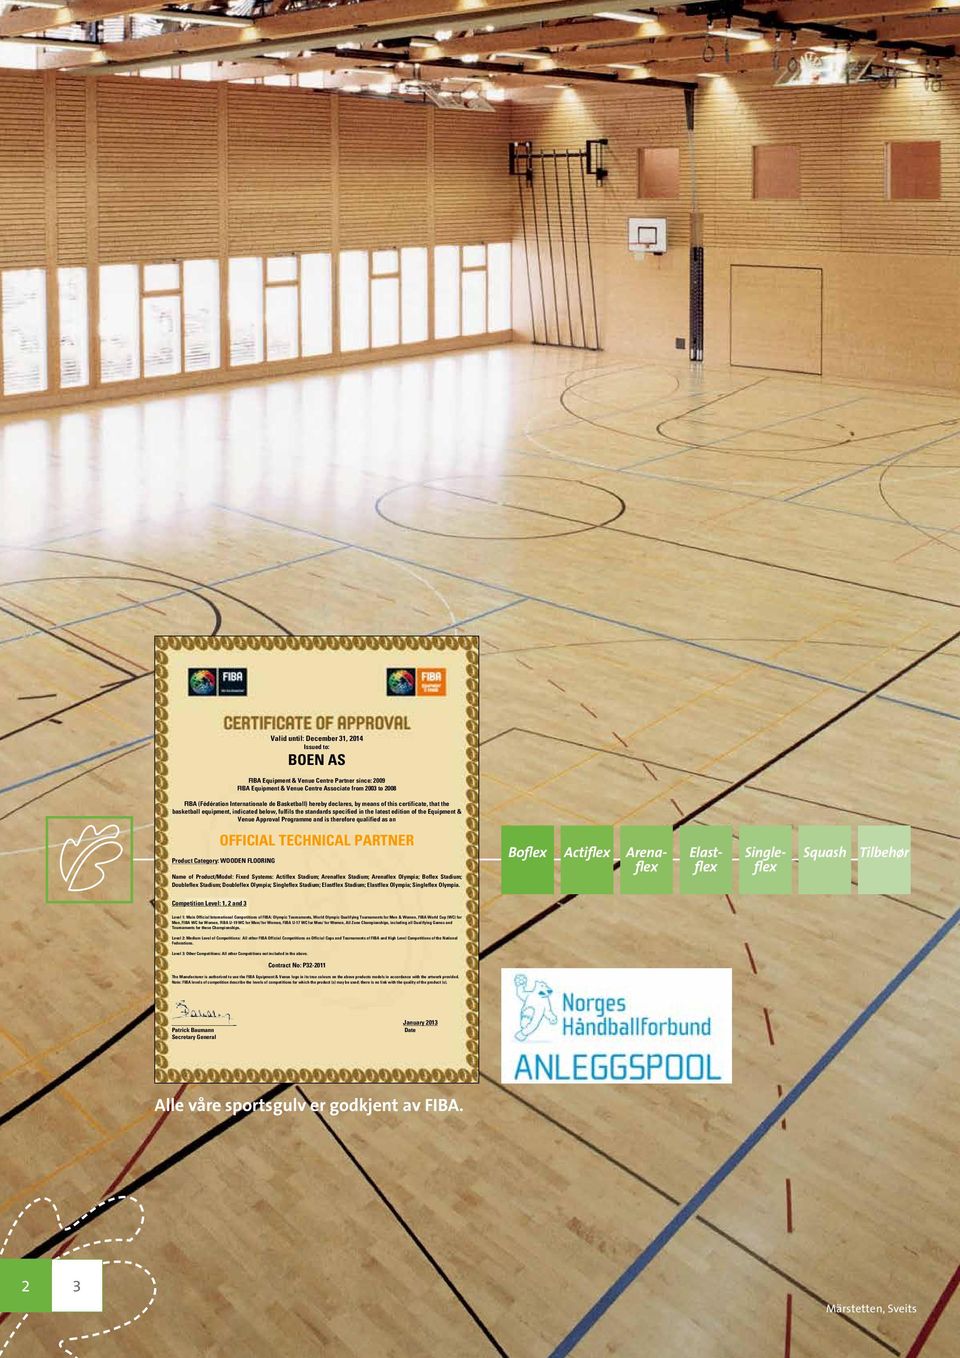 Programme and is therefore qualified as an OFFICIAL TECHNICAL PARTNER Product Category: WOODEN FLOORING Name of Product/Model: Fixed Systems: Actiflex Stadium; Arenaflex Stadium; Arenaflex Olympia;